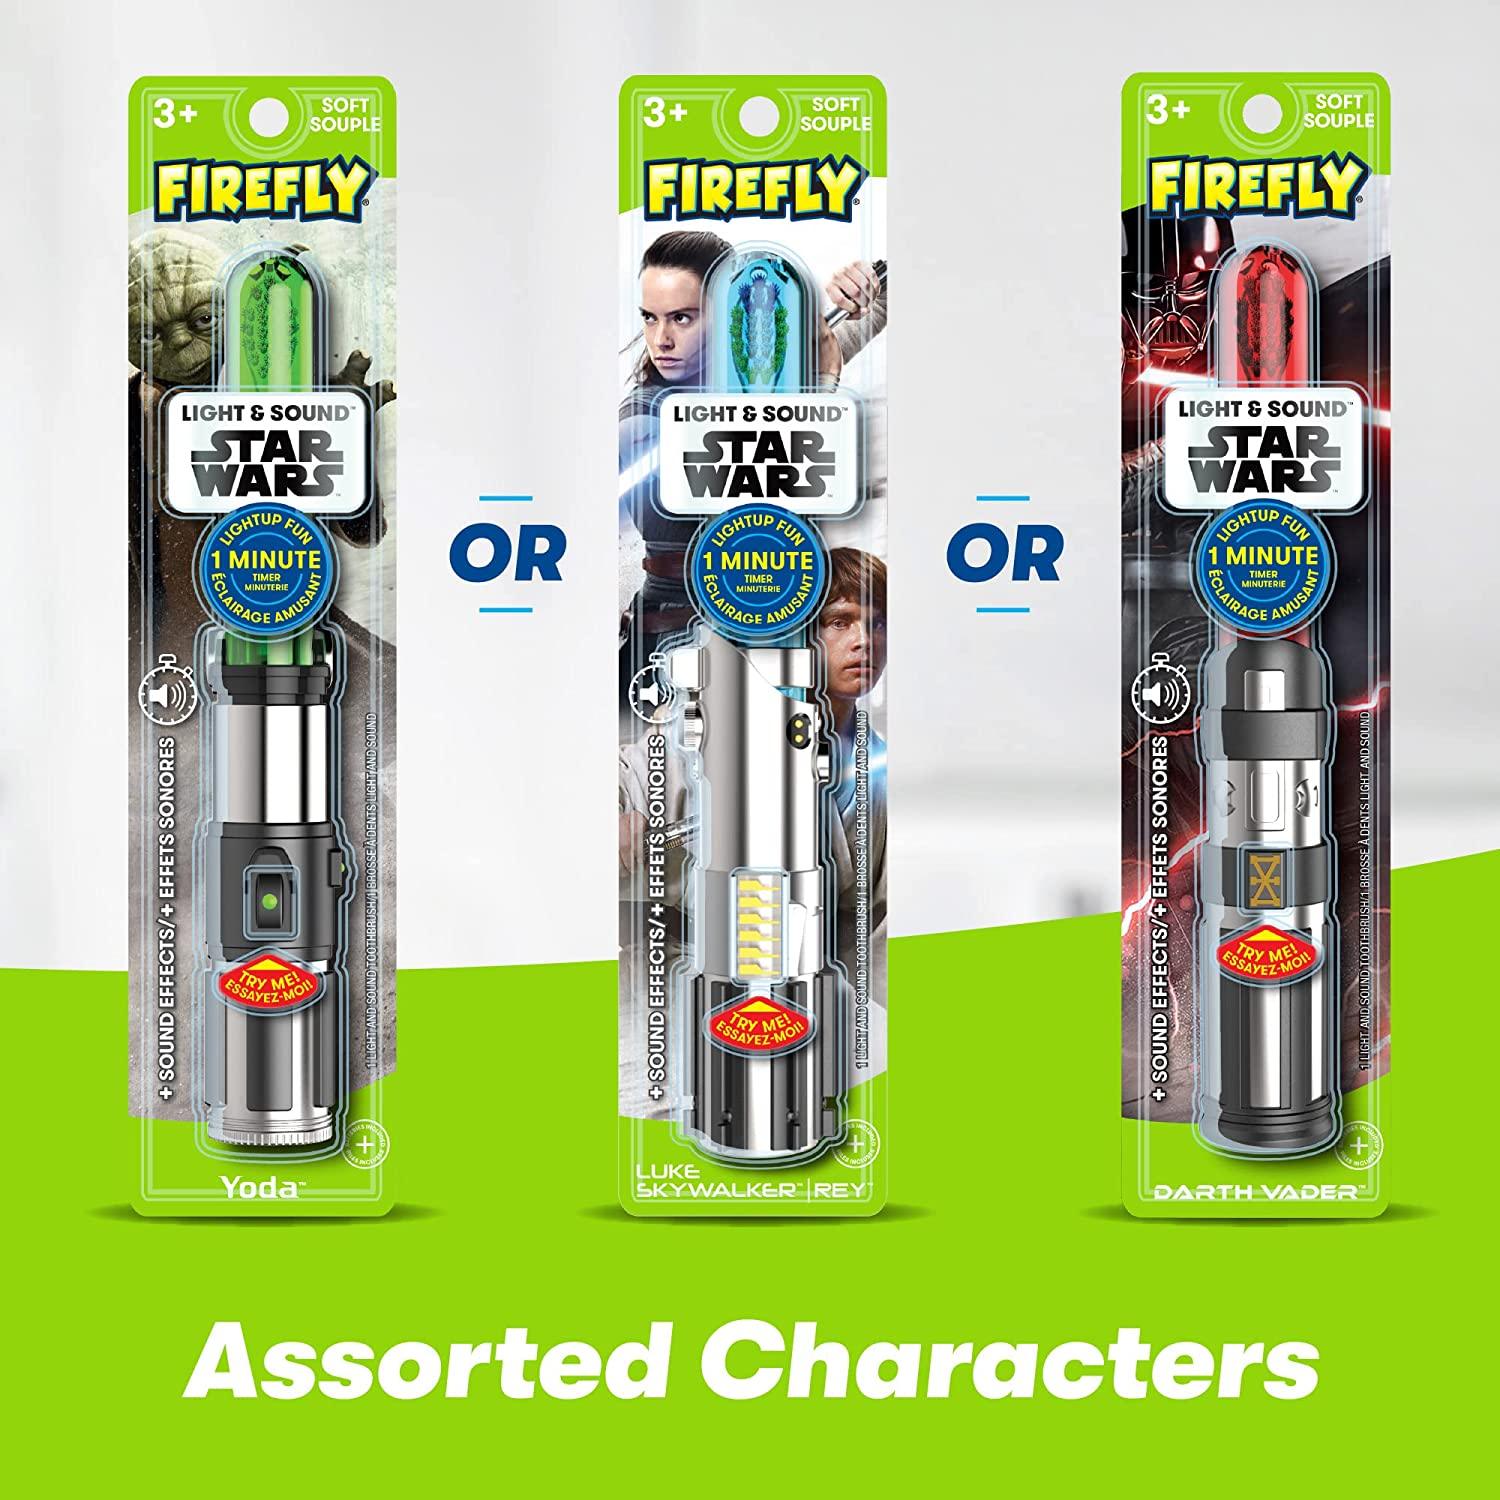 Firefly Clean N' Protect Star Wars Power Toothbrush - Color May Varey - BumbleToys - 5-7 Years, Baby Saftey & Health, Boys, Girls, Pre-Order, star wars, Toothbrush